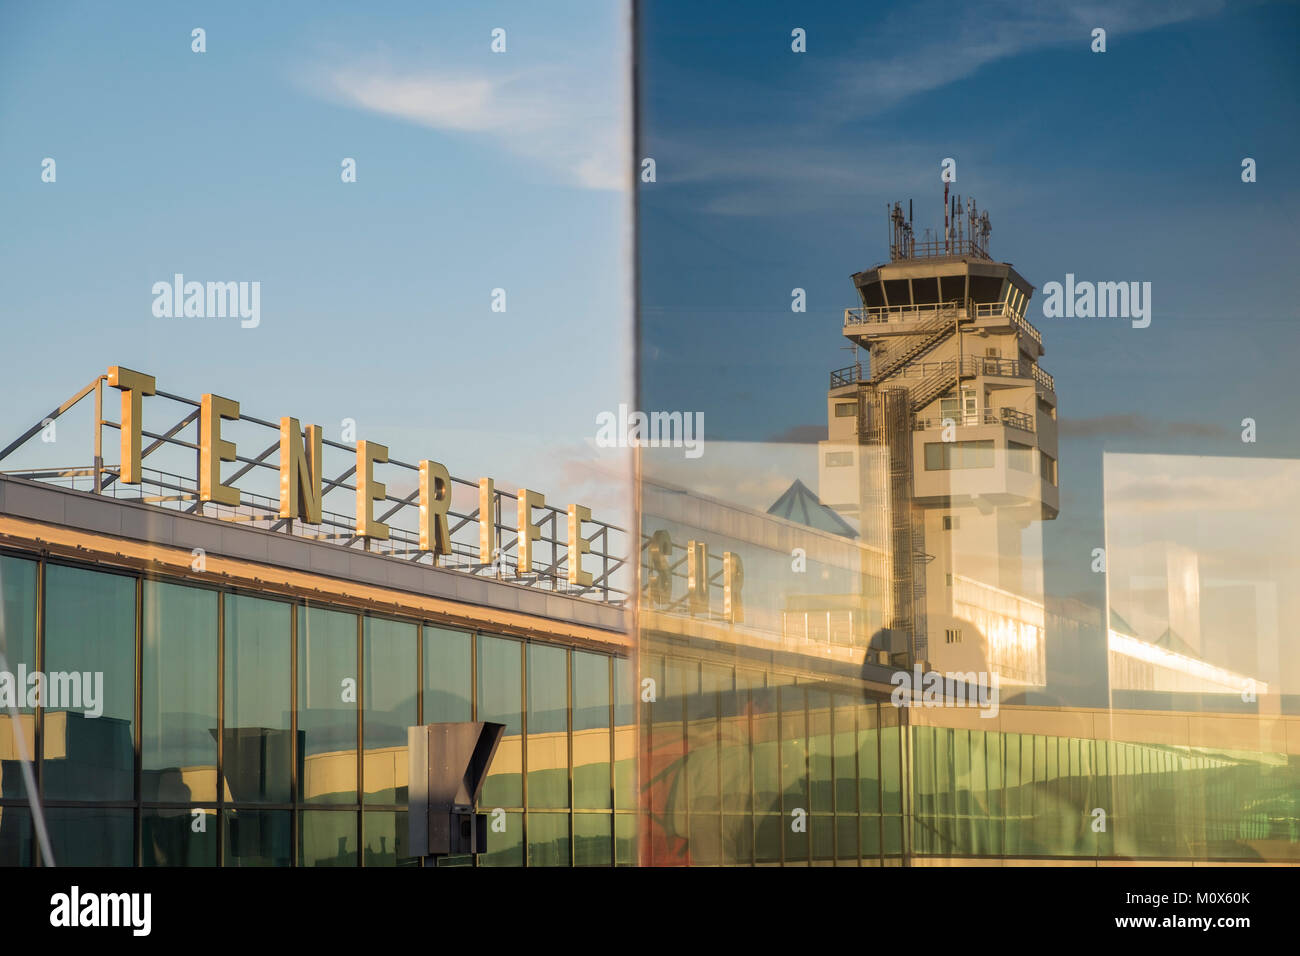 Tenerife Sur airport, control tower, name sign, airside through glass window of boarding gate, Reina Sofia, Canary Islands, Spain Stock Photo